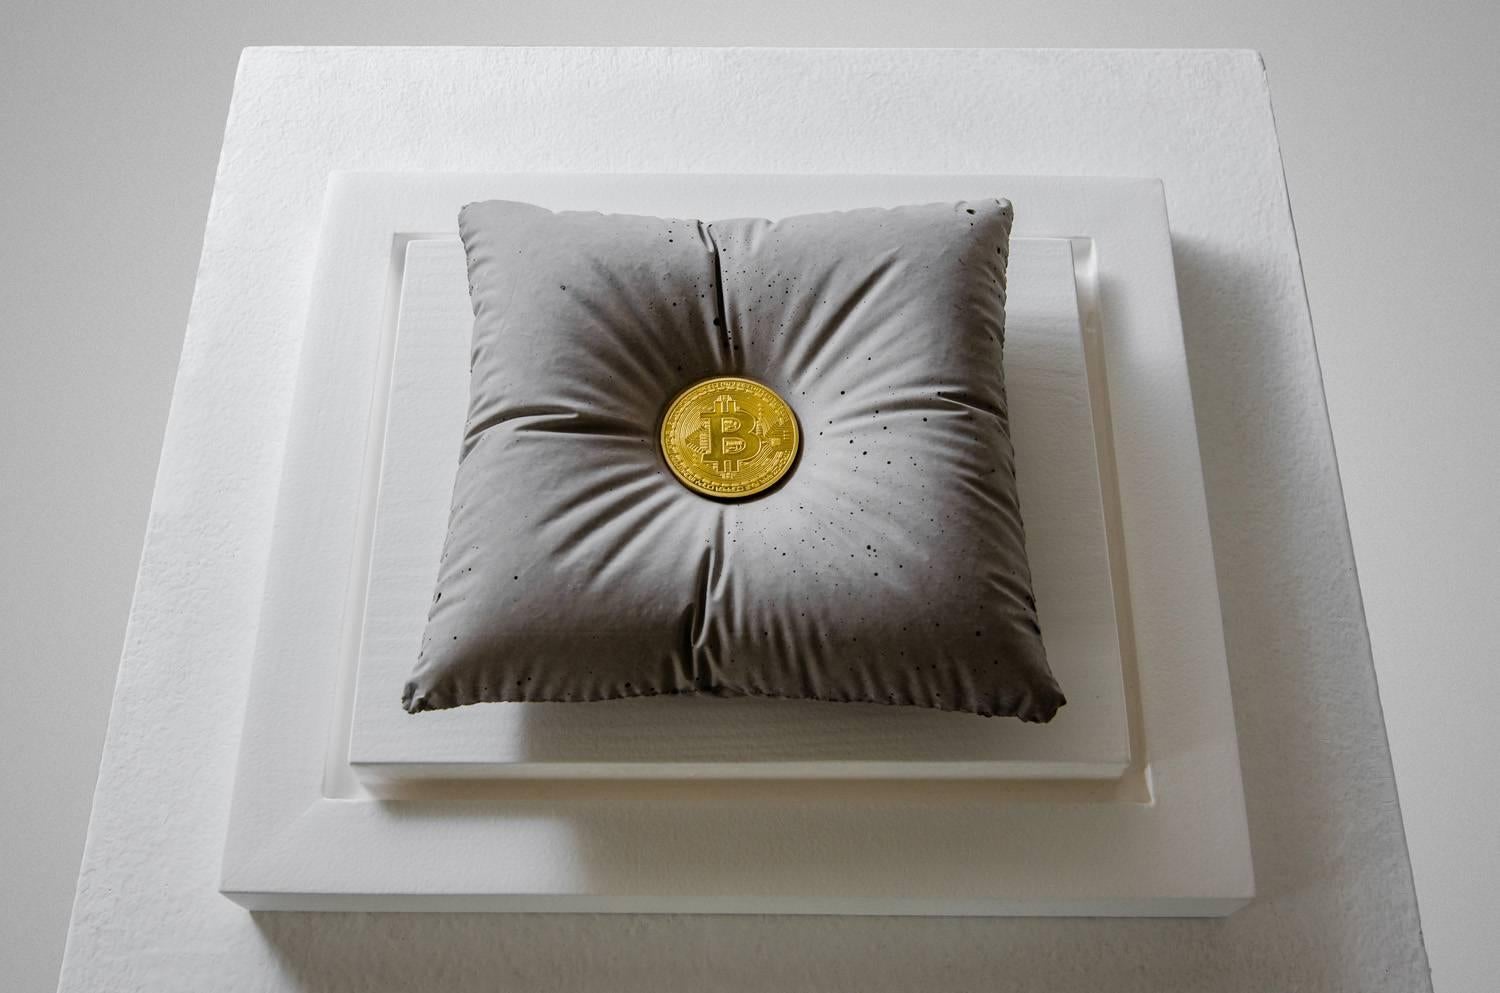 ONE BITCOIN
Concrete Pillow holding the weight of a Bitcoin. Sculpture enclosed in a glass urn.

Concept:
The sculpture is an ode to the blockchain revolution, headed by Bitcoin. An altar to innovation and to the new digital assets that no